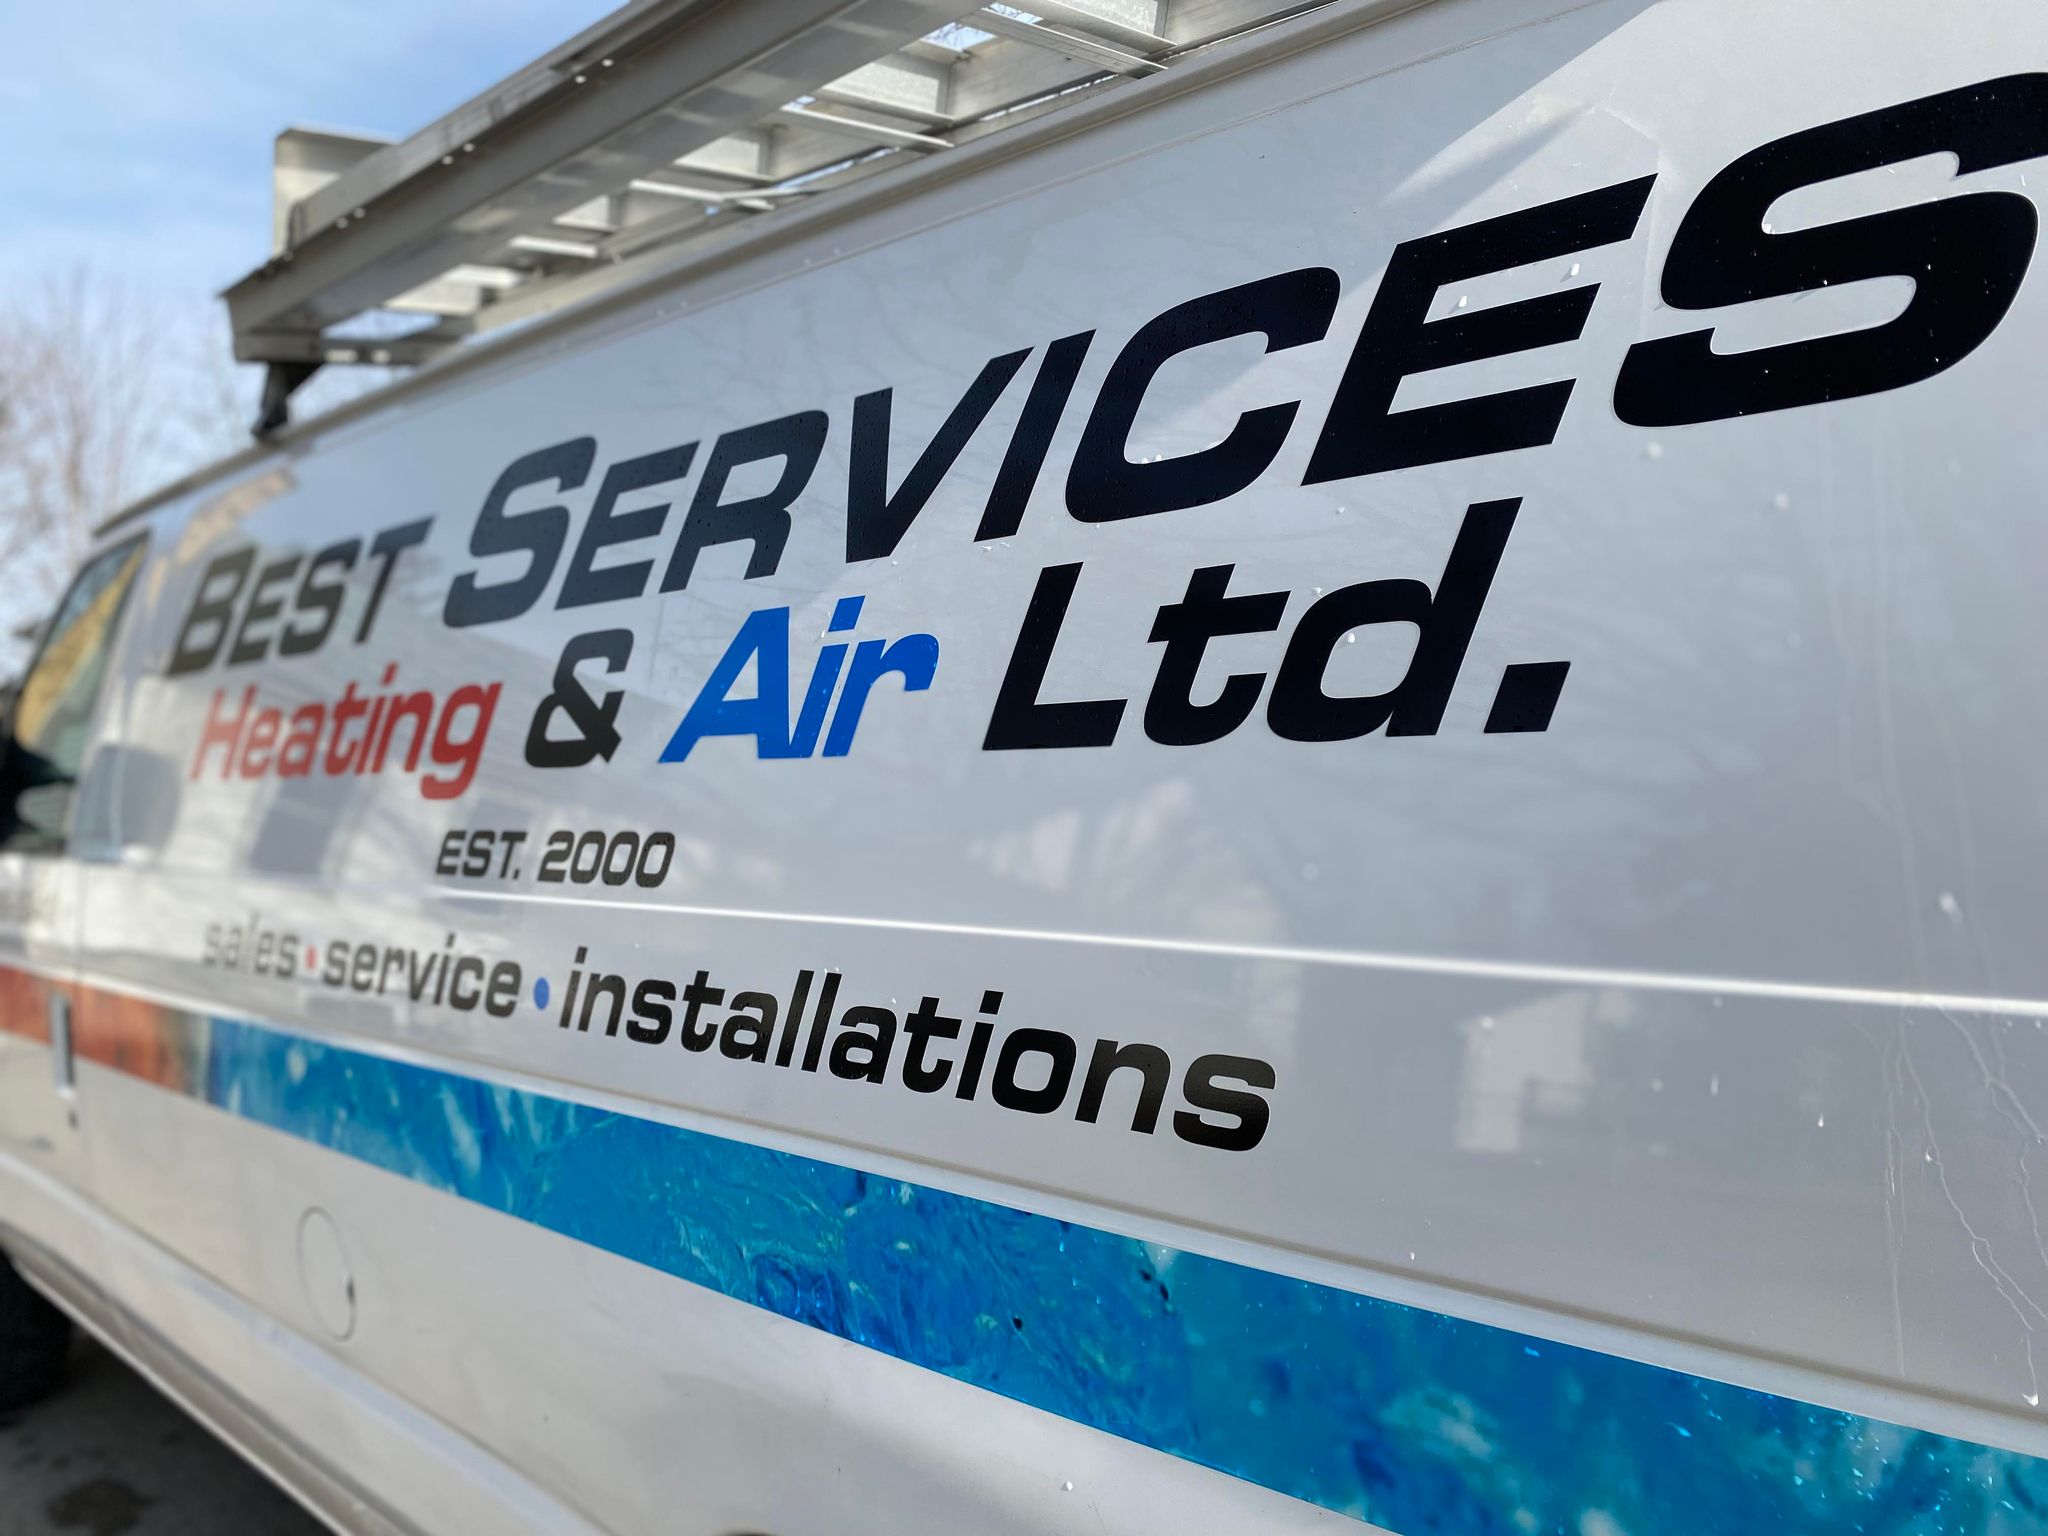 Logo for Best Services Heating & Air Ltd.